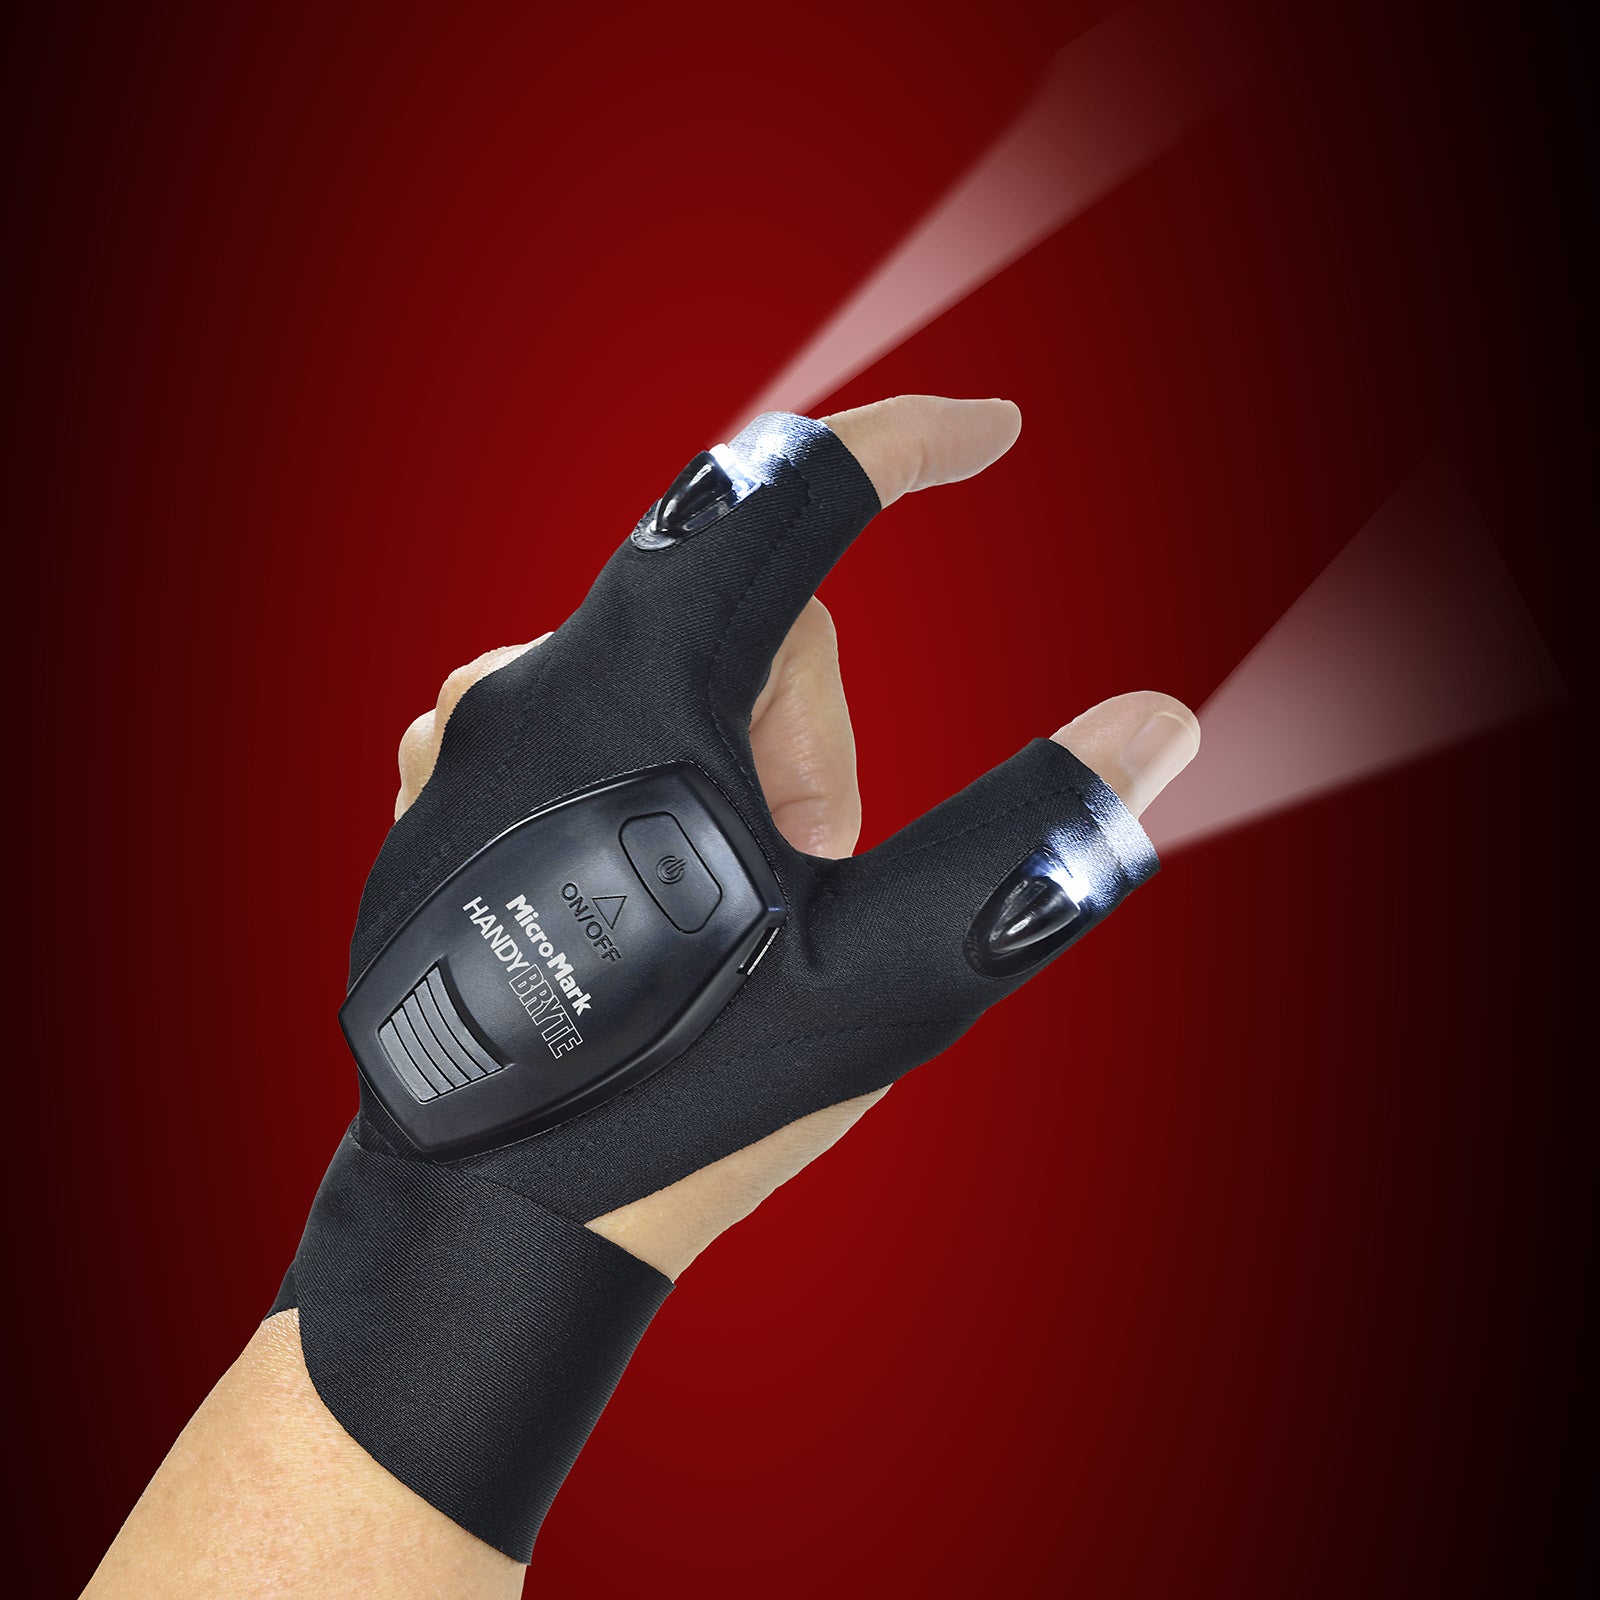 HandyBRYTE Glove - Mounted LED Light System by Micro - Mark